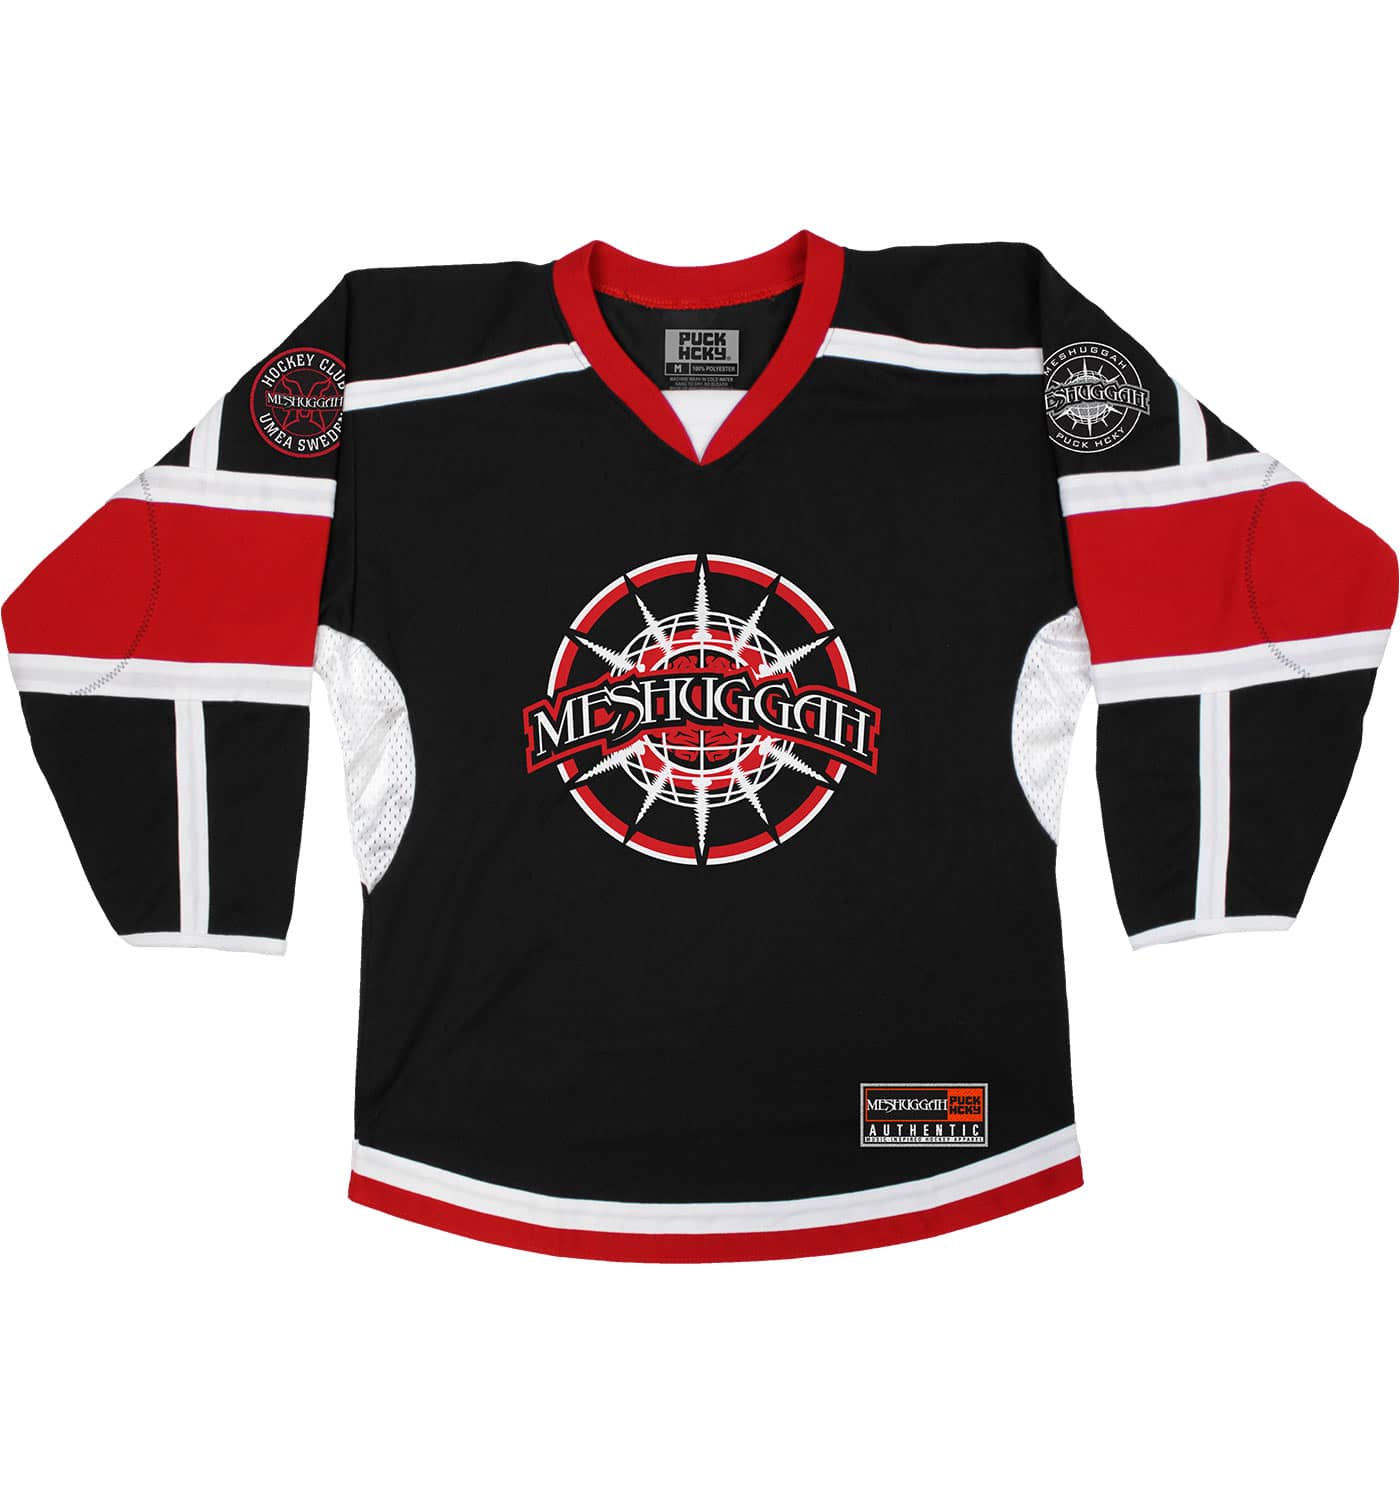 CREEPING DEATH WORLD DECAY EMBROIDERED HOCKEY JERSEY – allinmerch